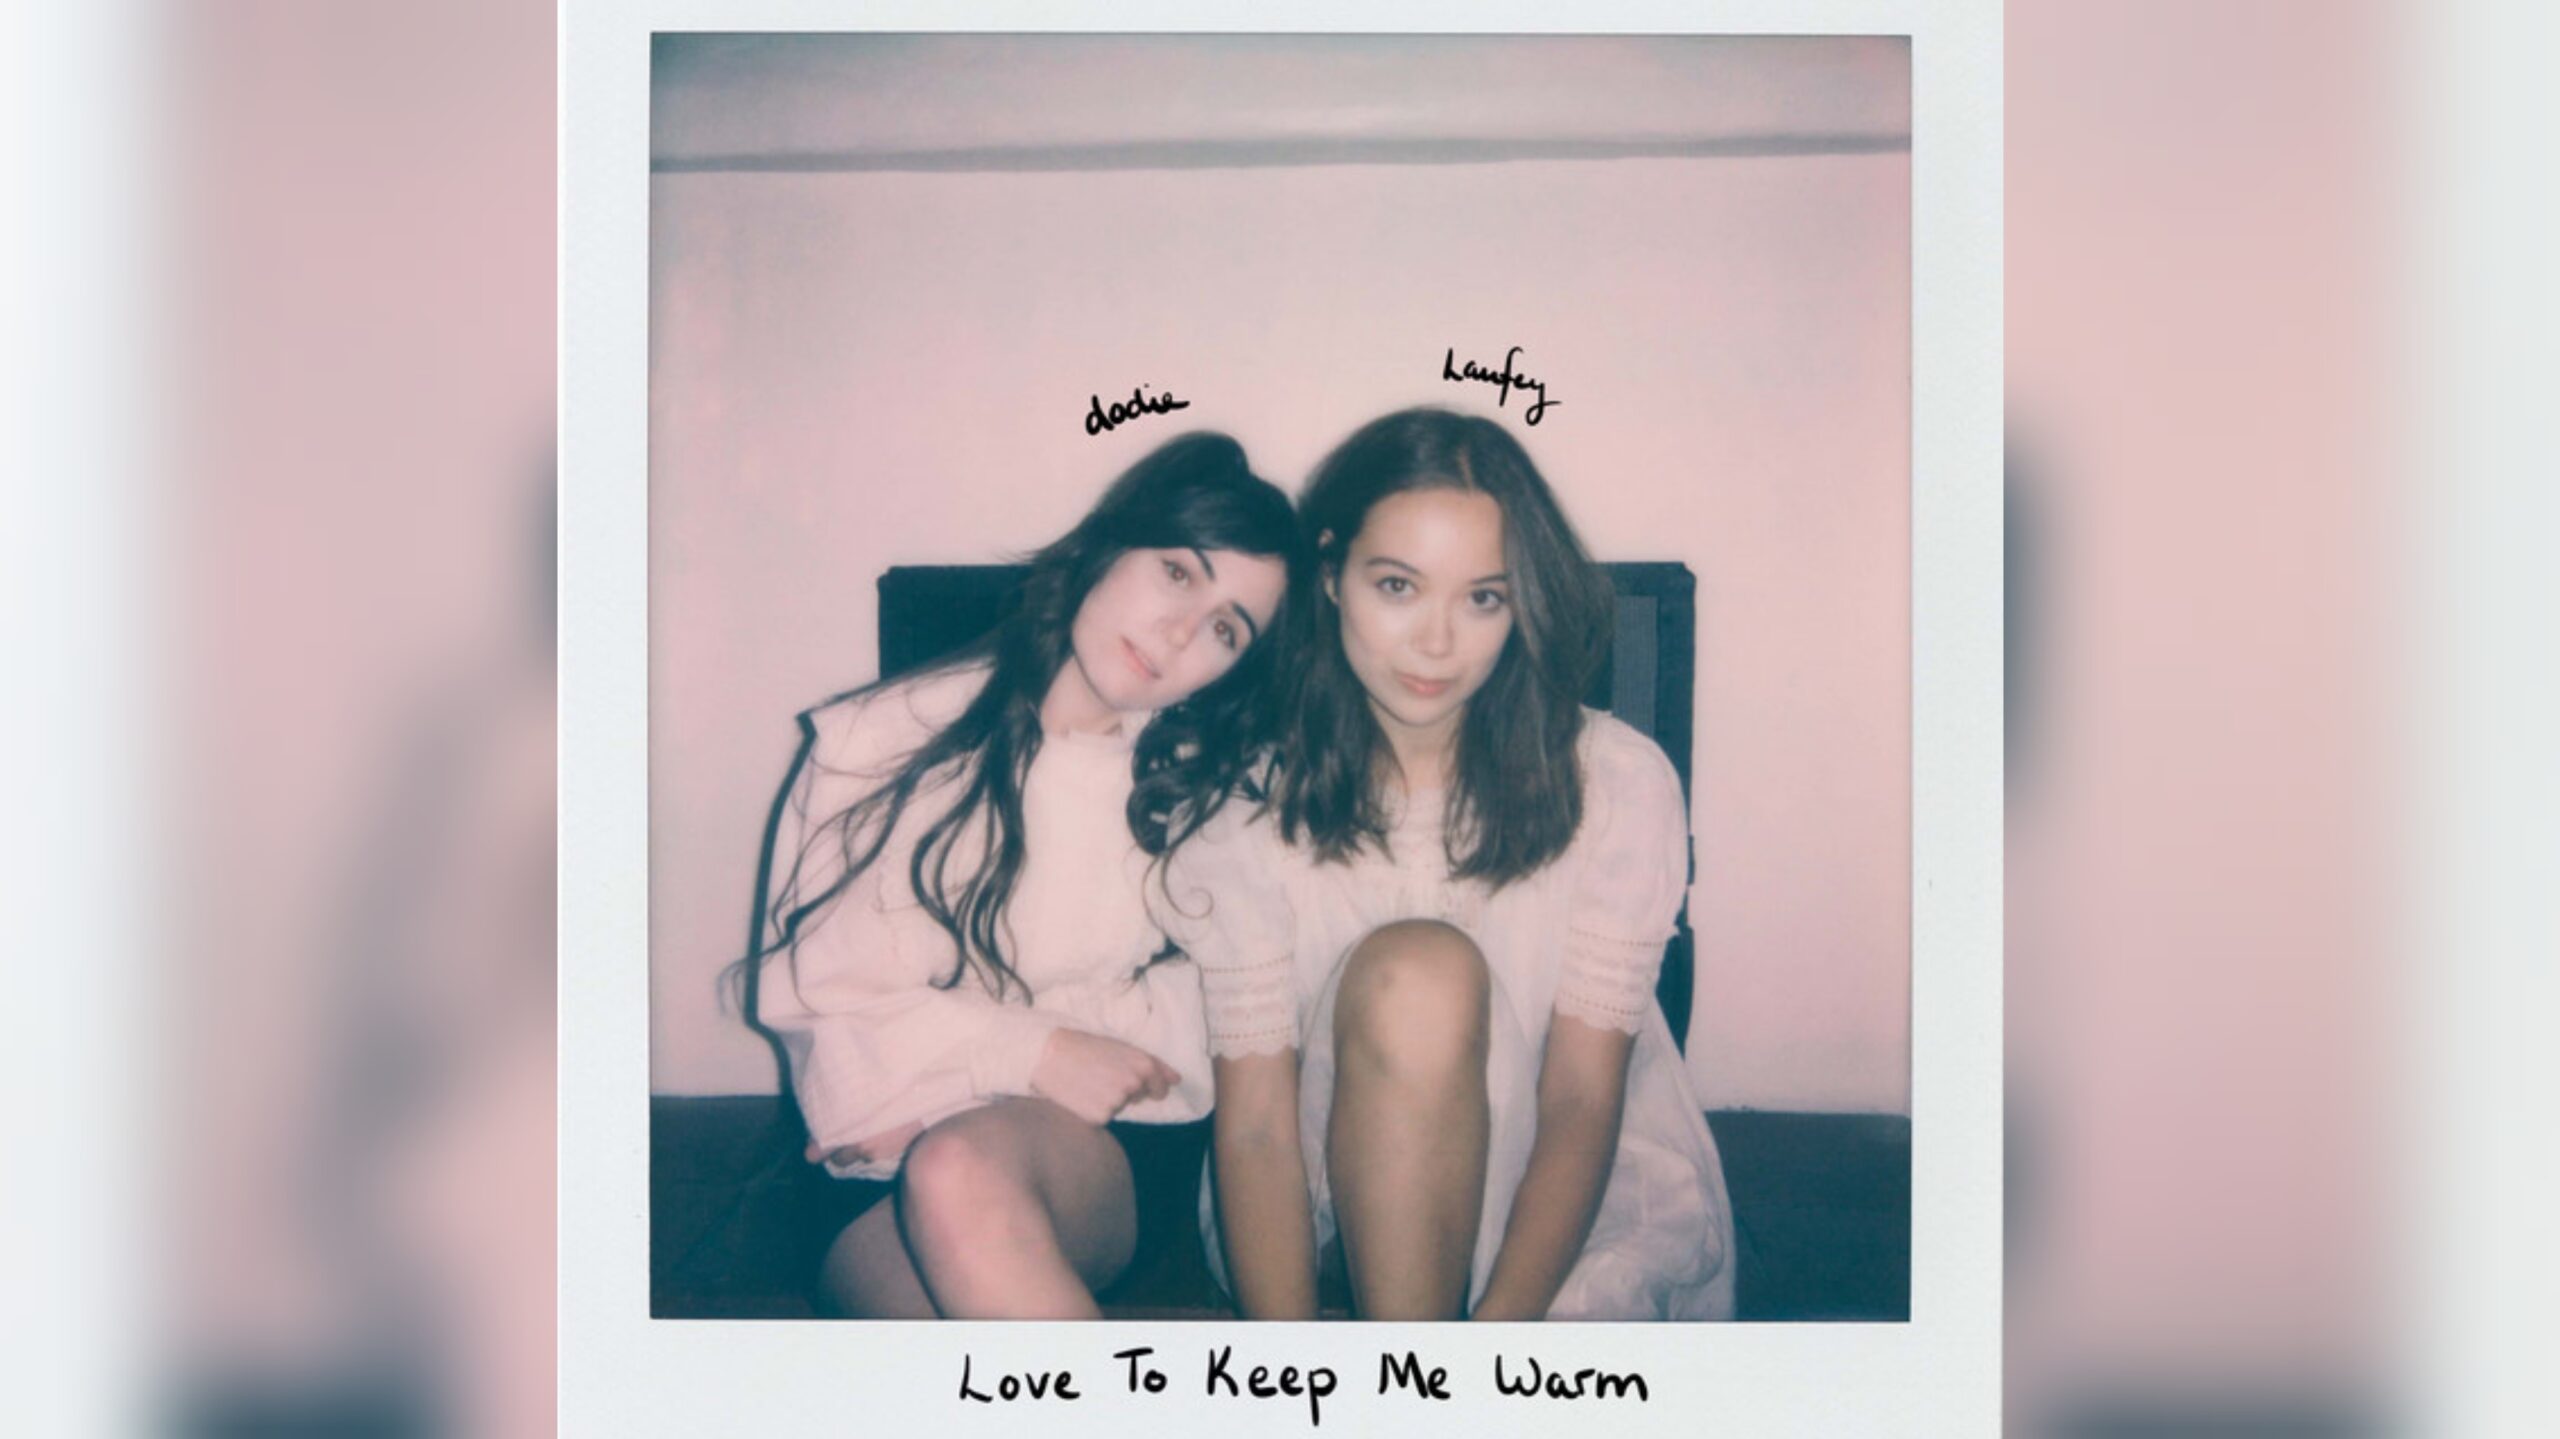 Cover for the single "Love to Keep Me Warm" by Laufey and Dodie